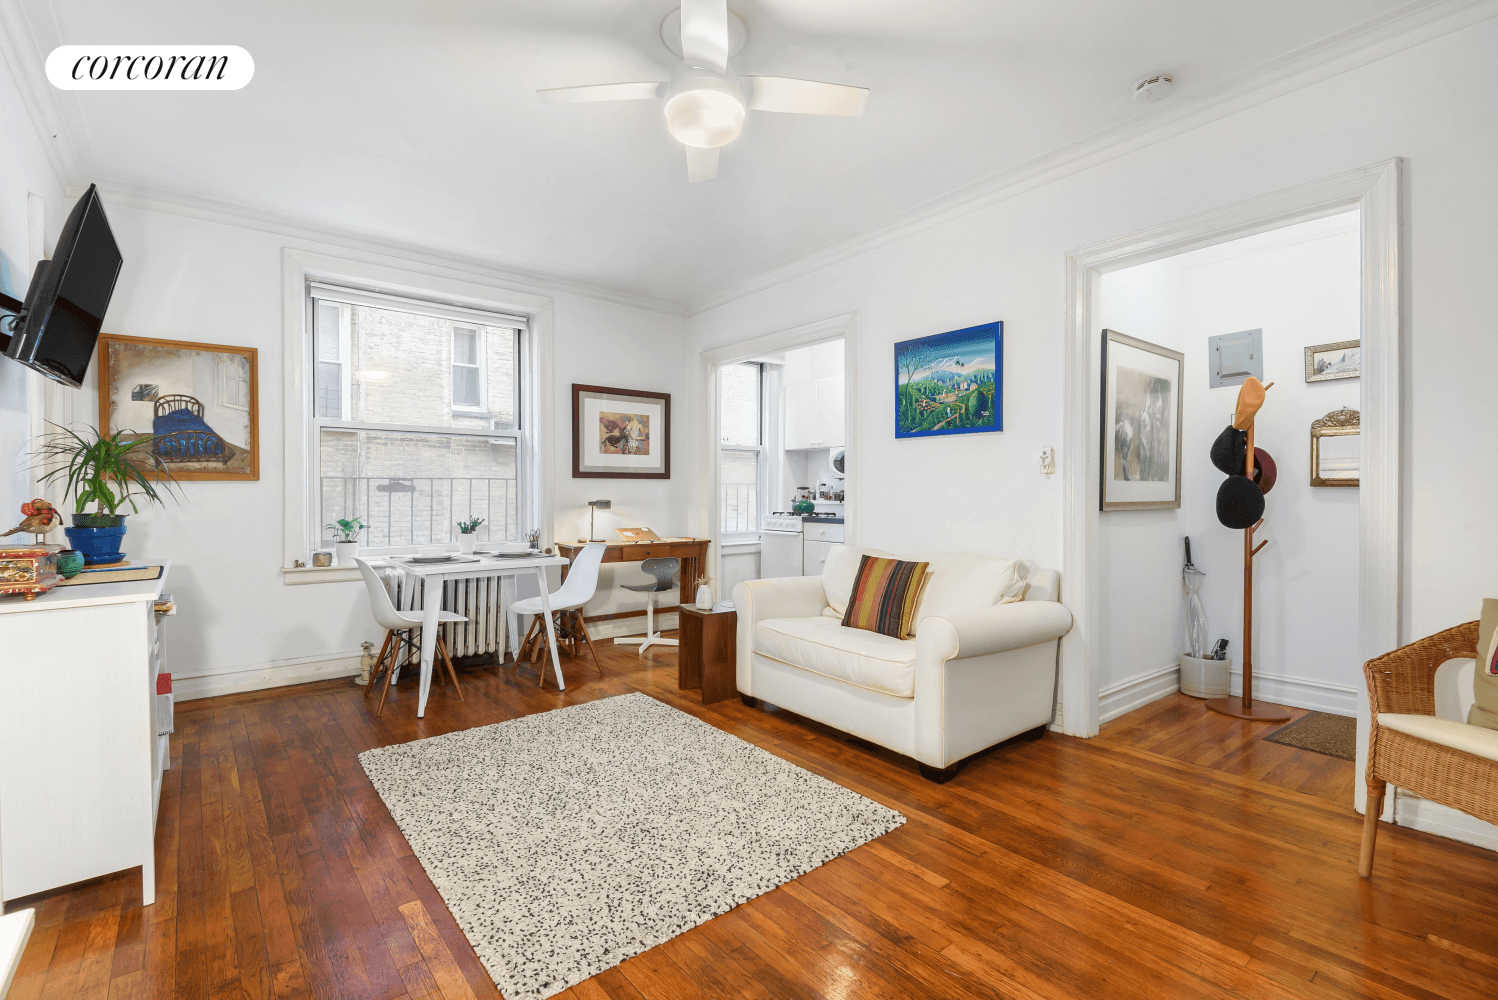 Welcome to 59 Pineapple Street, a charming and cozy pre war studio apartment nestled in the heart of Brooklyn Heights.